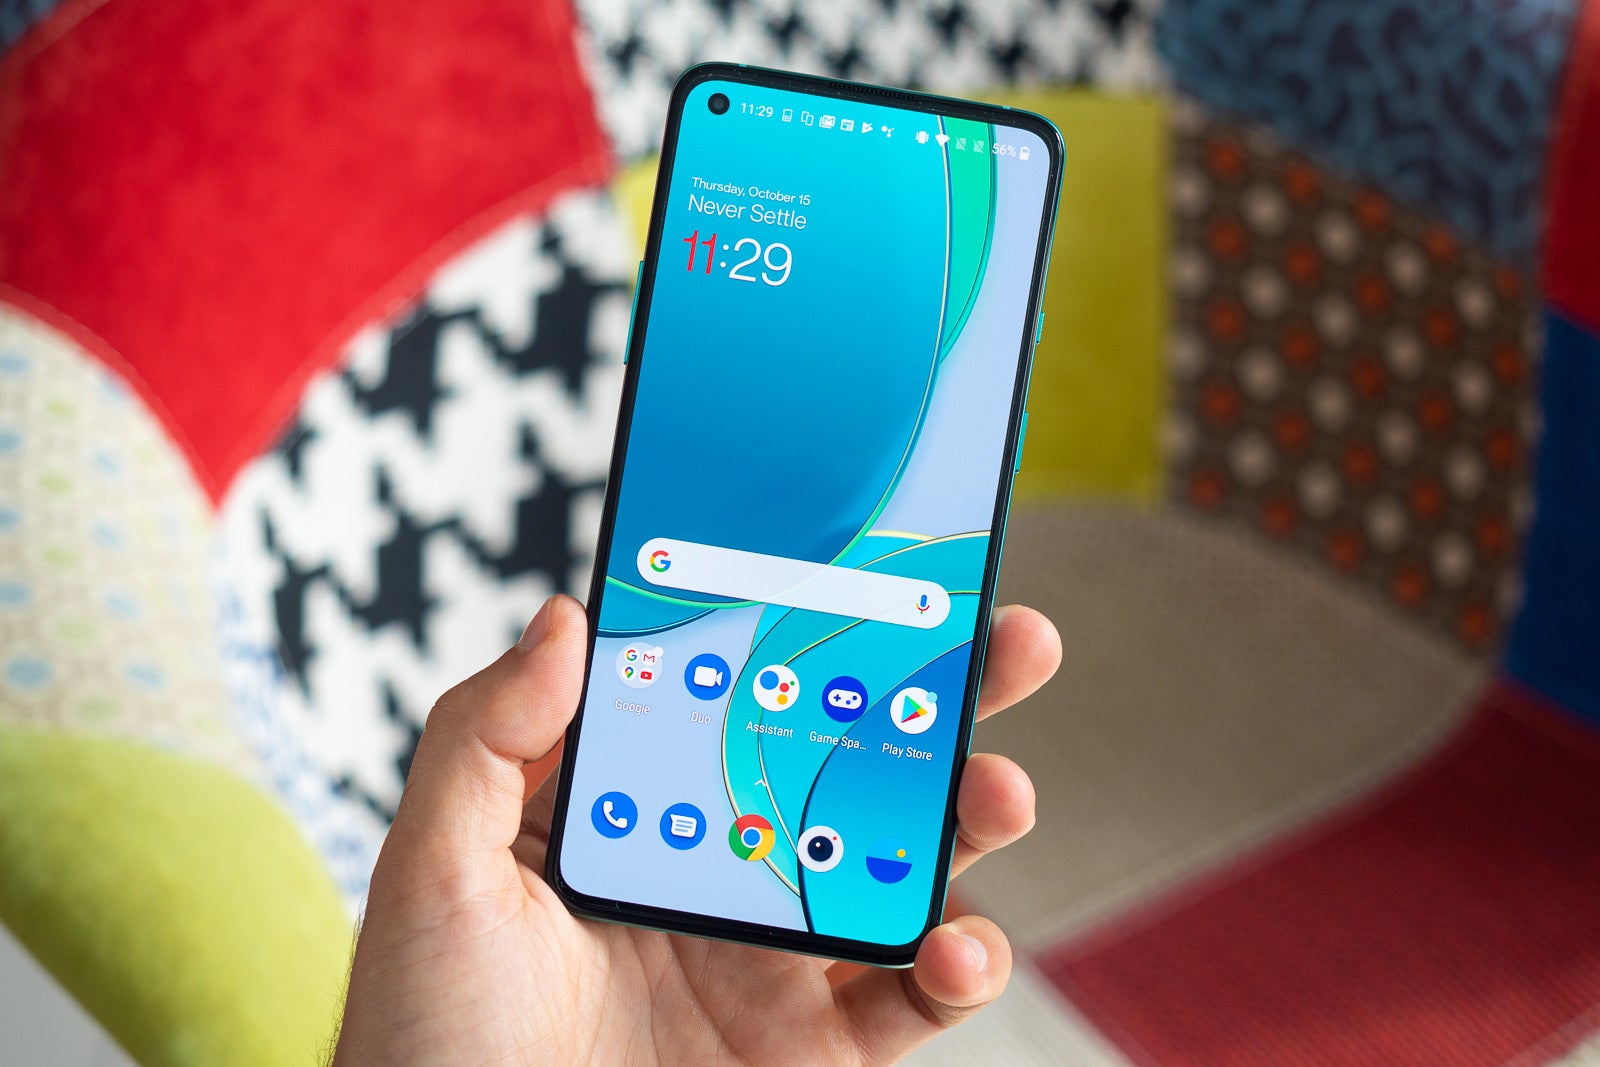  The OnePlus 8T 5G - This is what the OnePlus 9 5G will reportedly look like